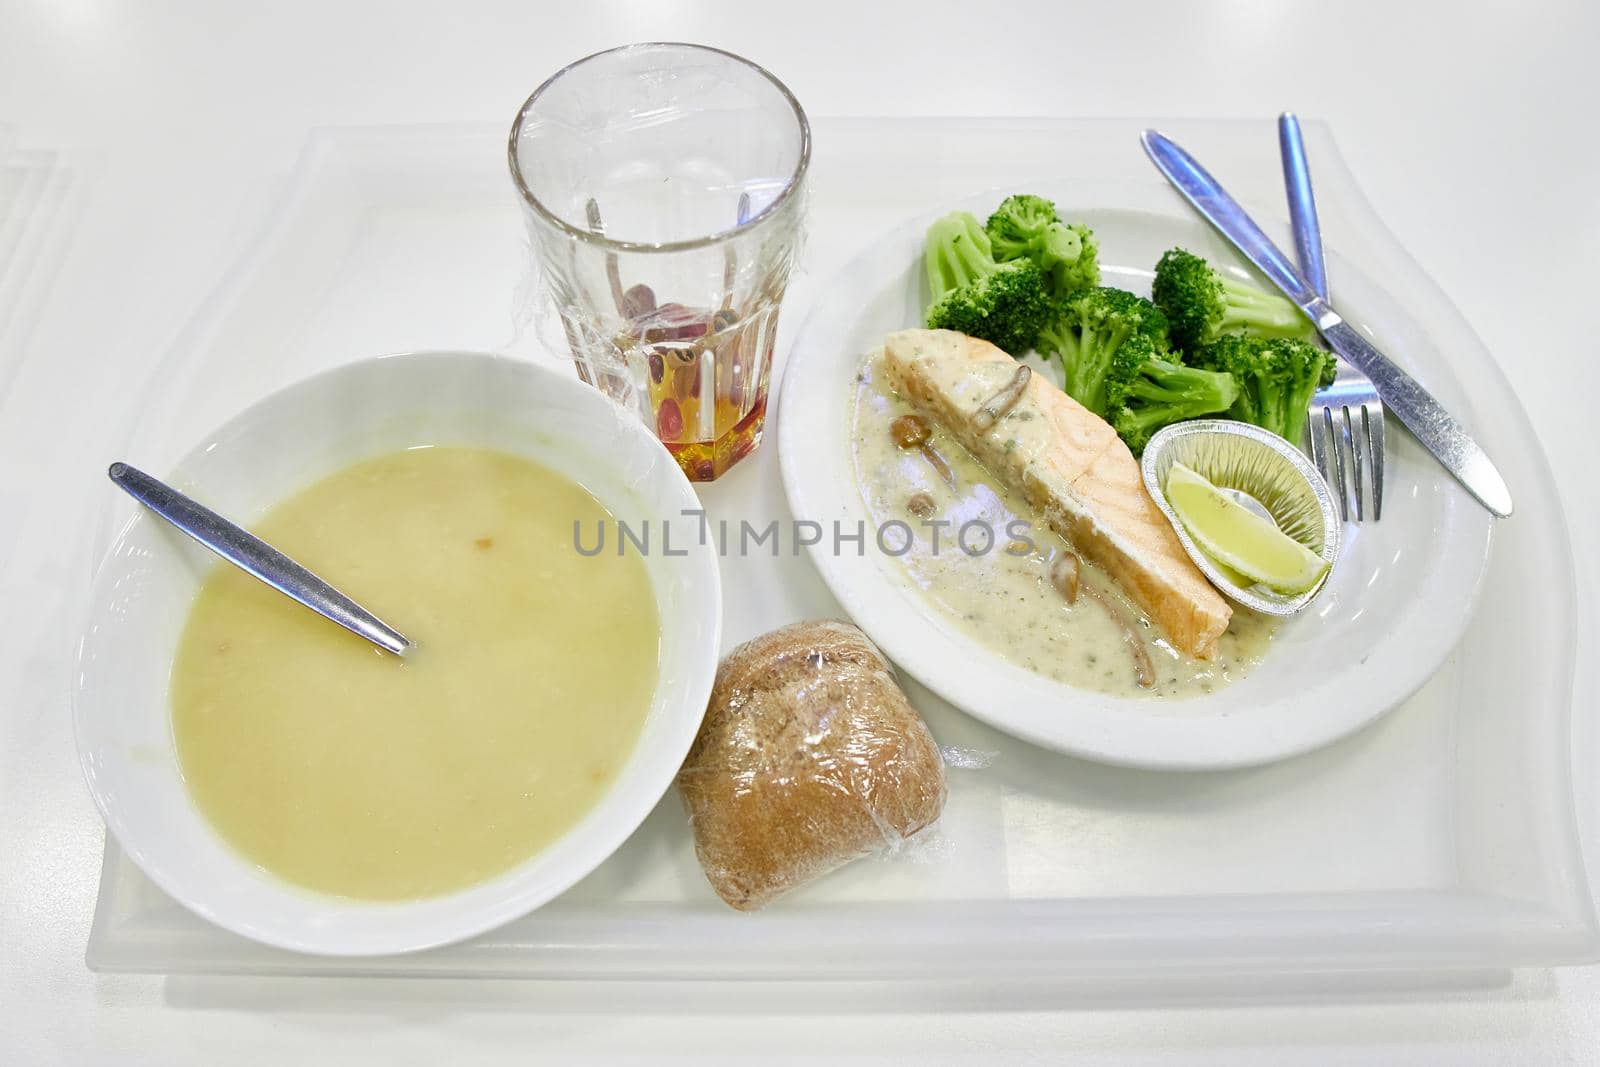 Mushroom soup puree and fish with vegetables on plates. Healthy food without meat by vadiar